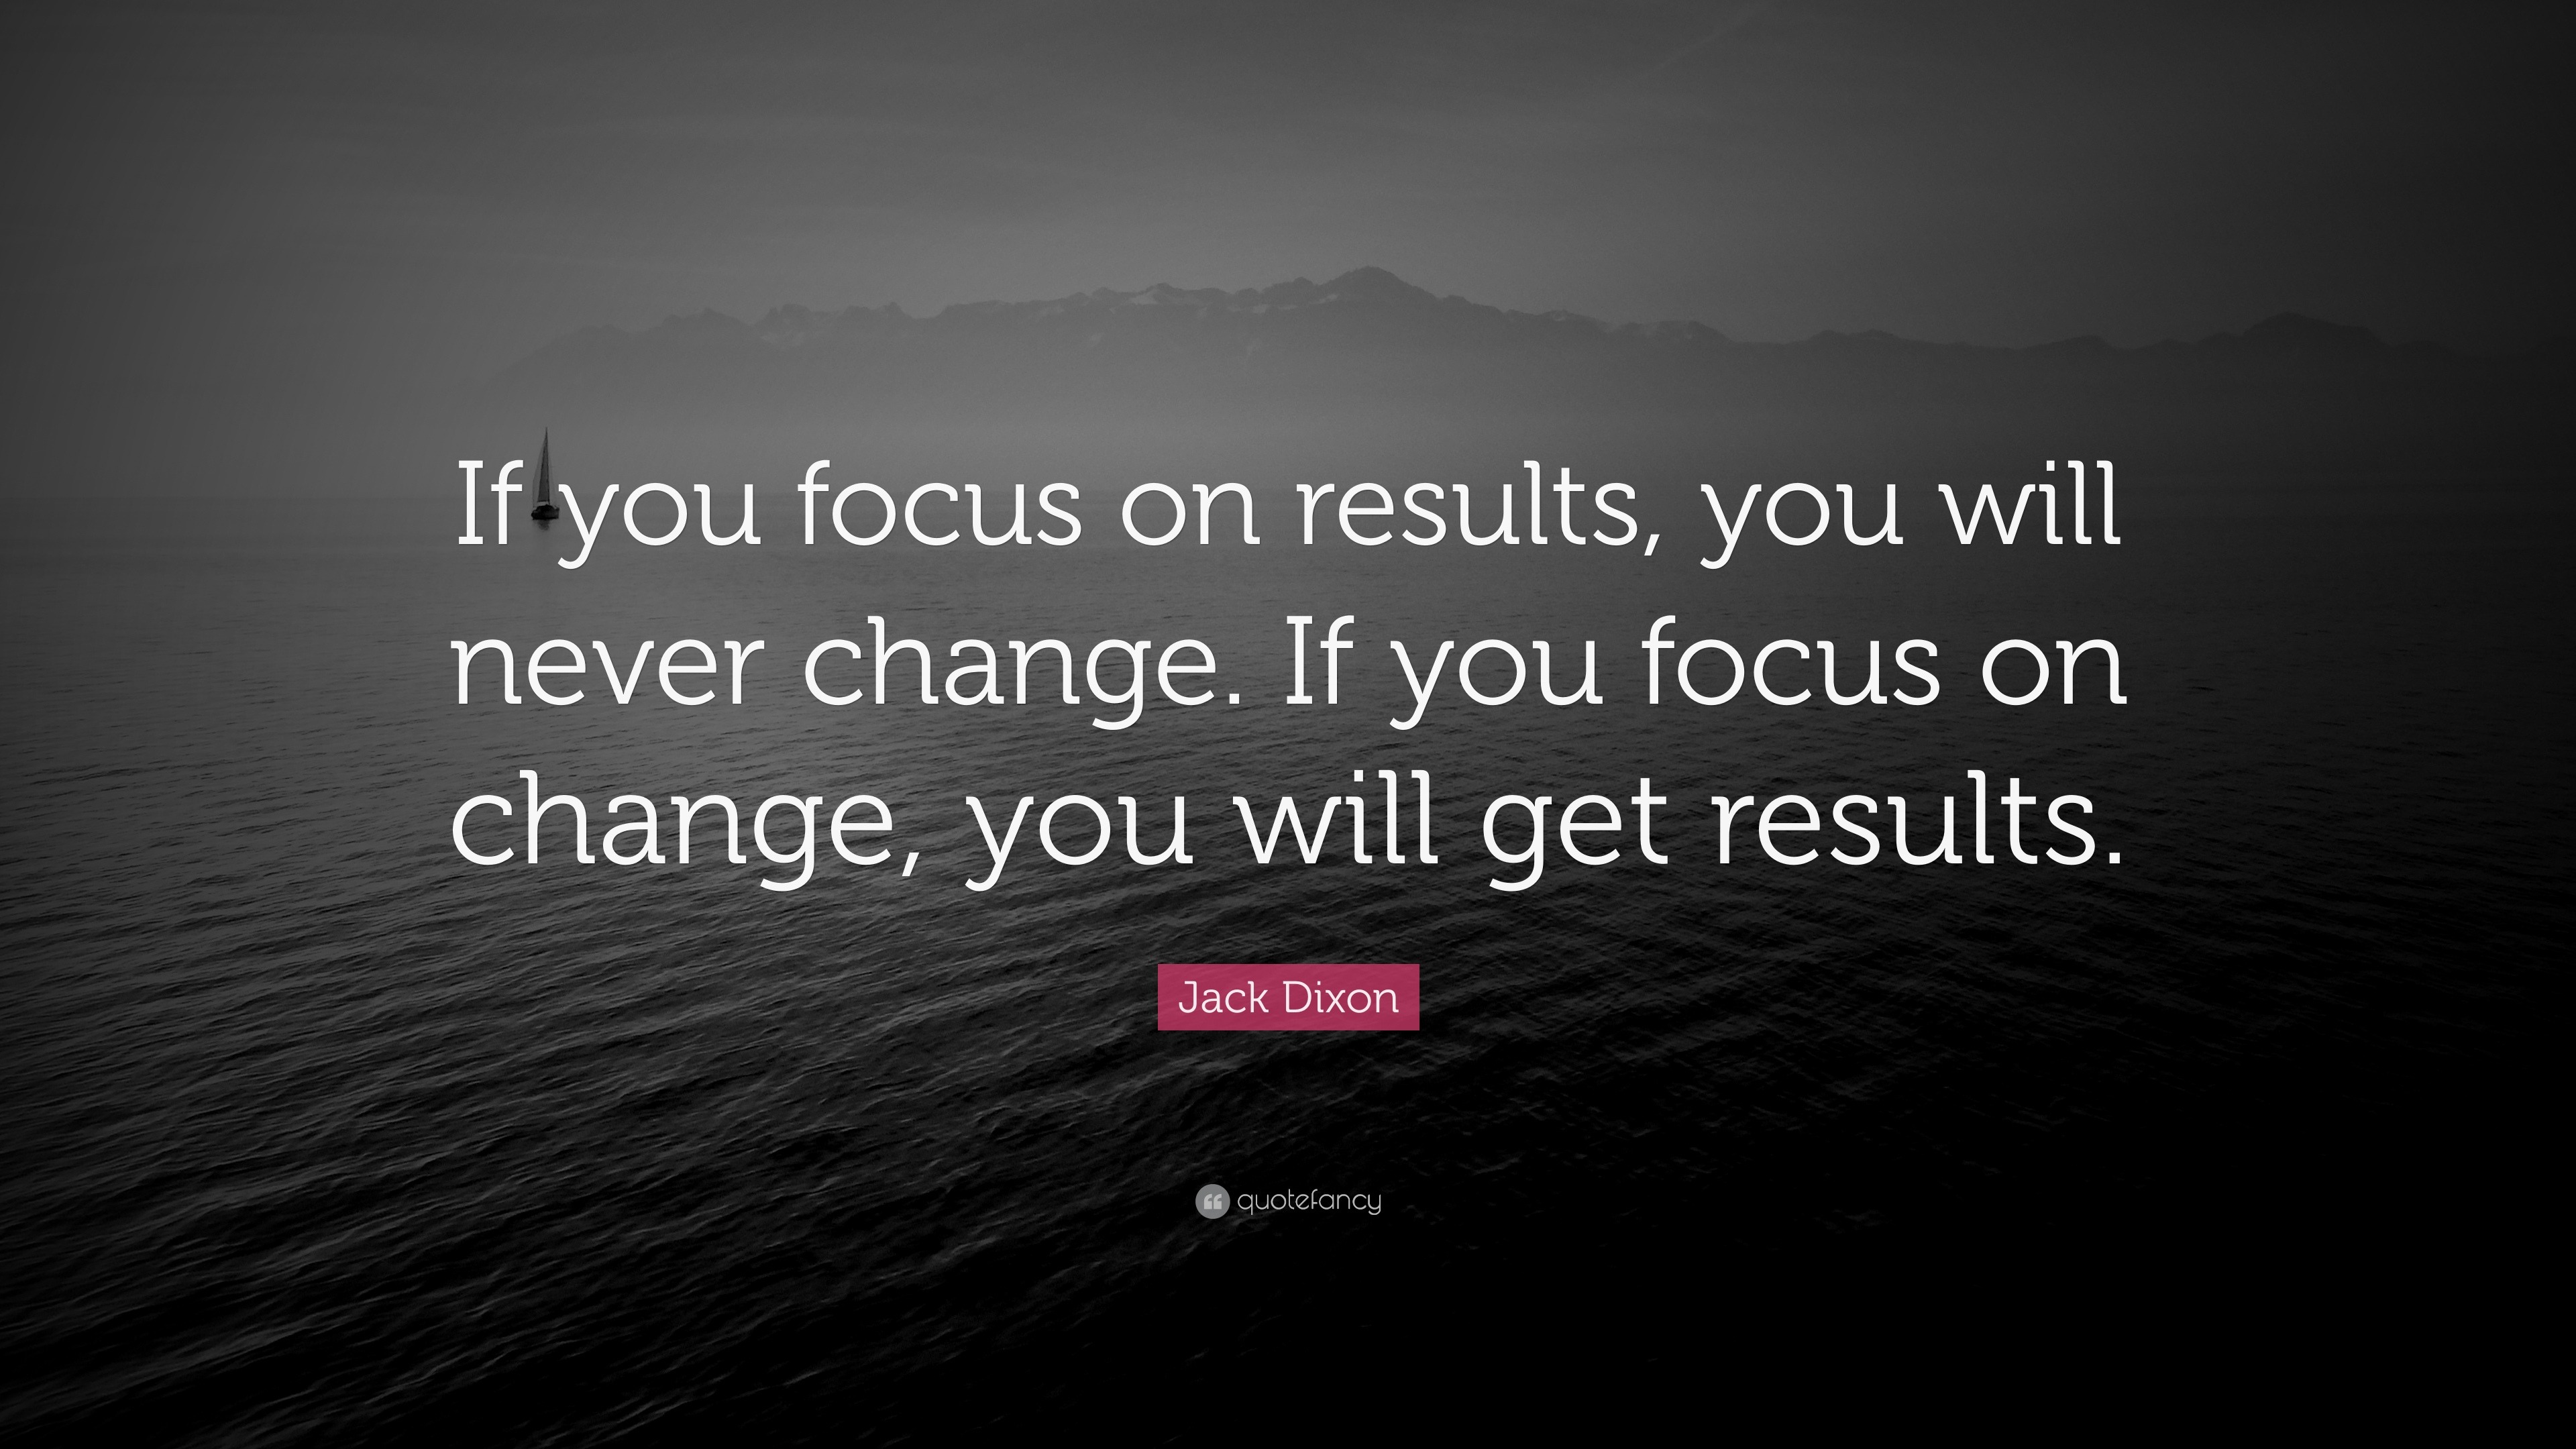 33133 Jack Dixon Quote If you focus on results you will never change If